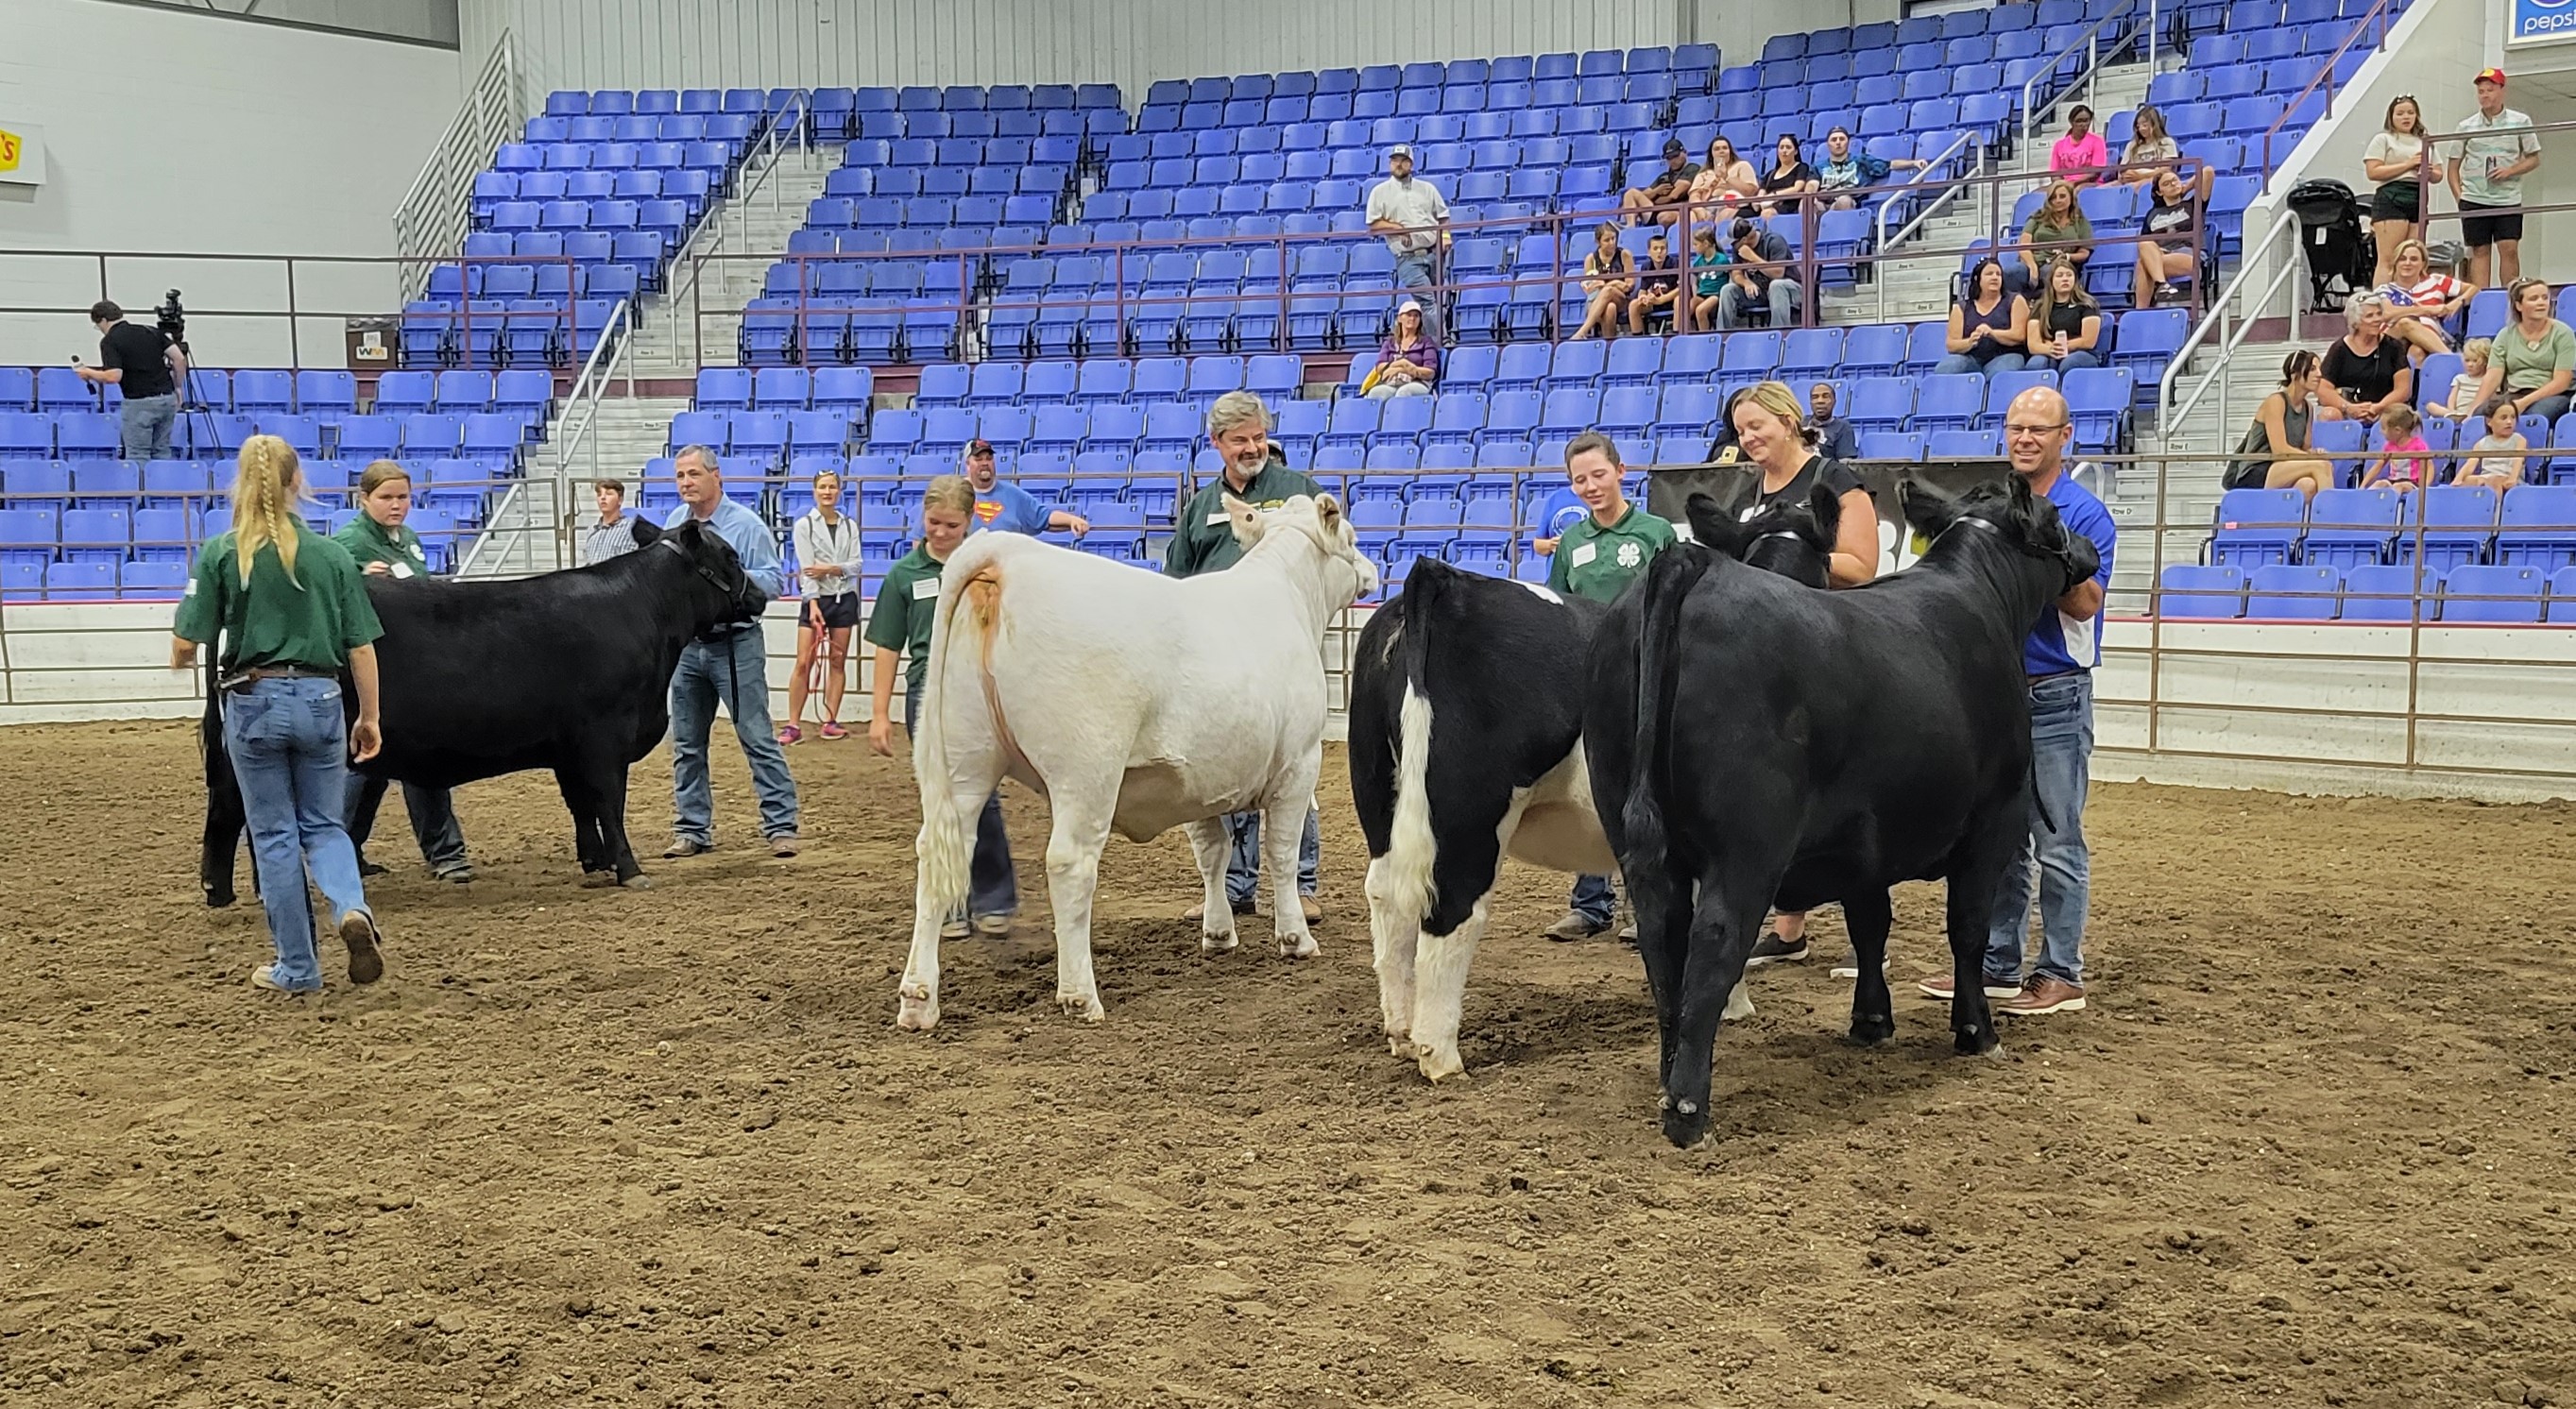 4-H’ers judge state leaders in the beef cattle competition during the North Dakota Leaders 4-H Showmanship Contest at the North Dakota State Fair in Minot. (NDSU photo)